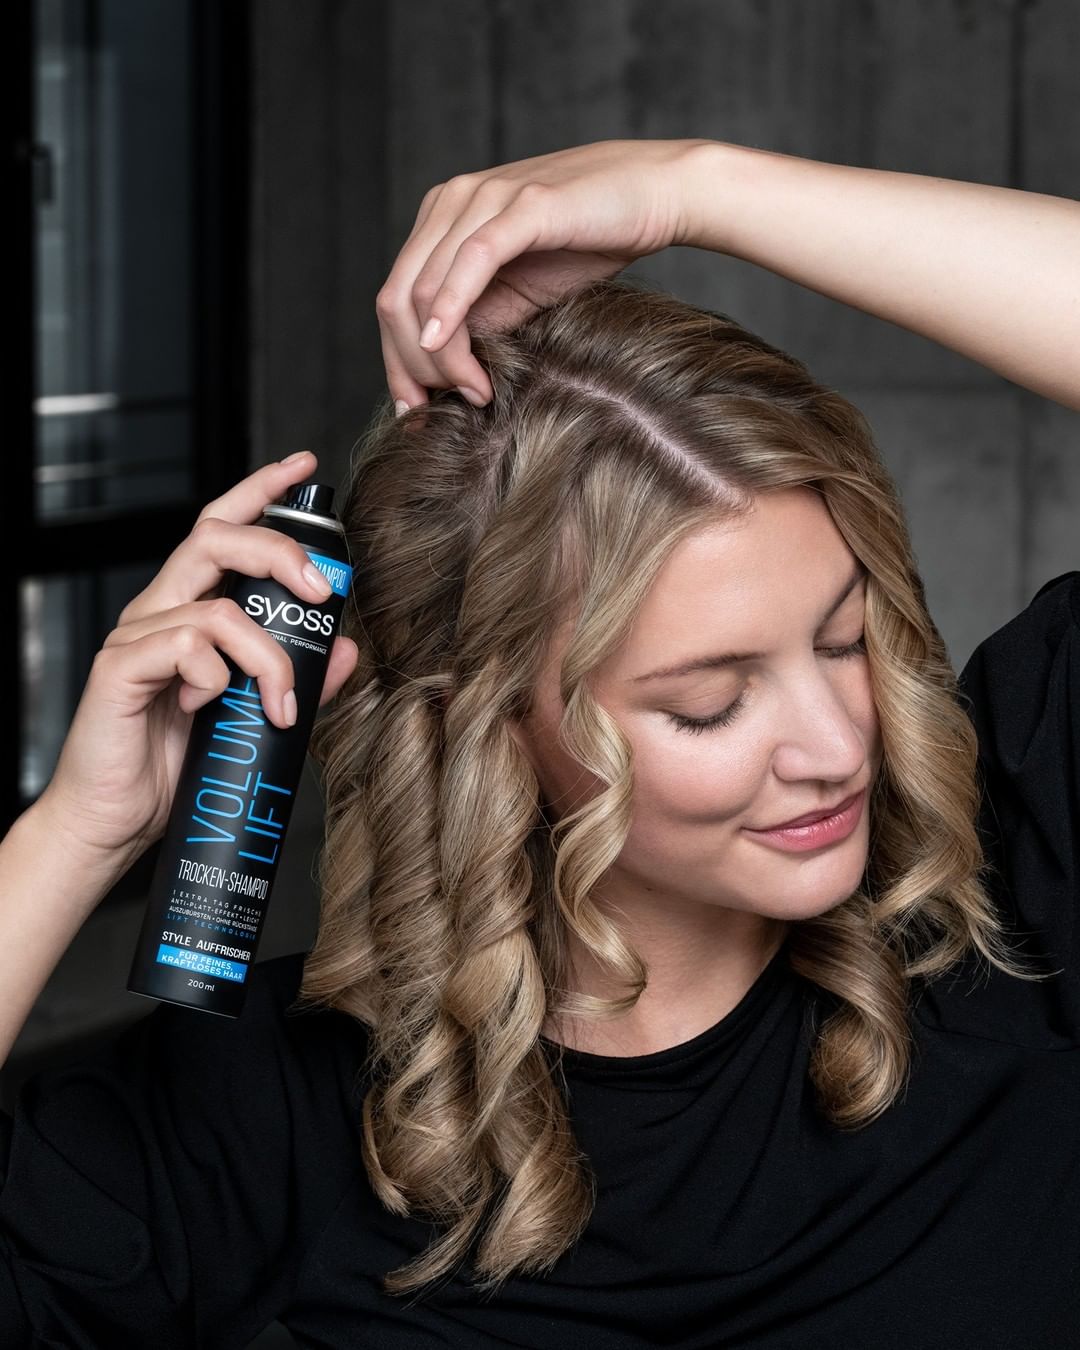 Syoss - To all curly girls: Did you know?! #Syoss #DryShampoo keeps your curls from clumping together. 💨 #getsyossed
.
.
.
#styling #hairstyling #hairhack #curls #curlscurlscurls #wavyhair #waves #bea...